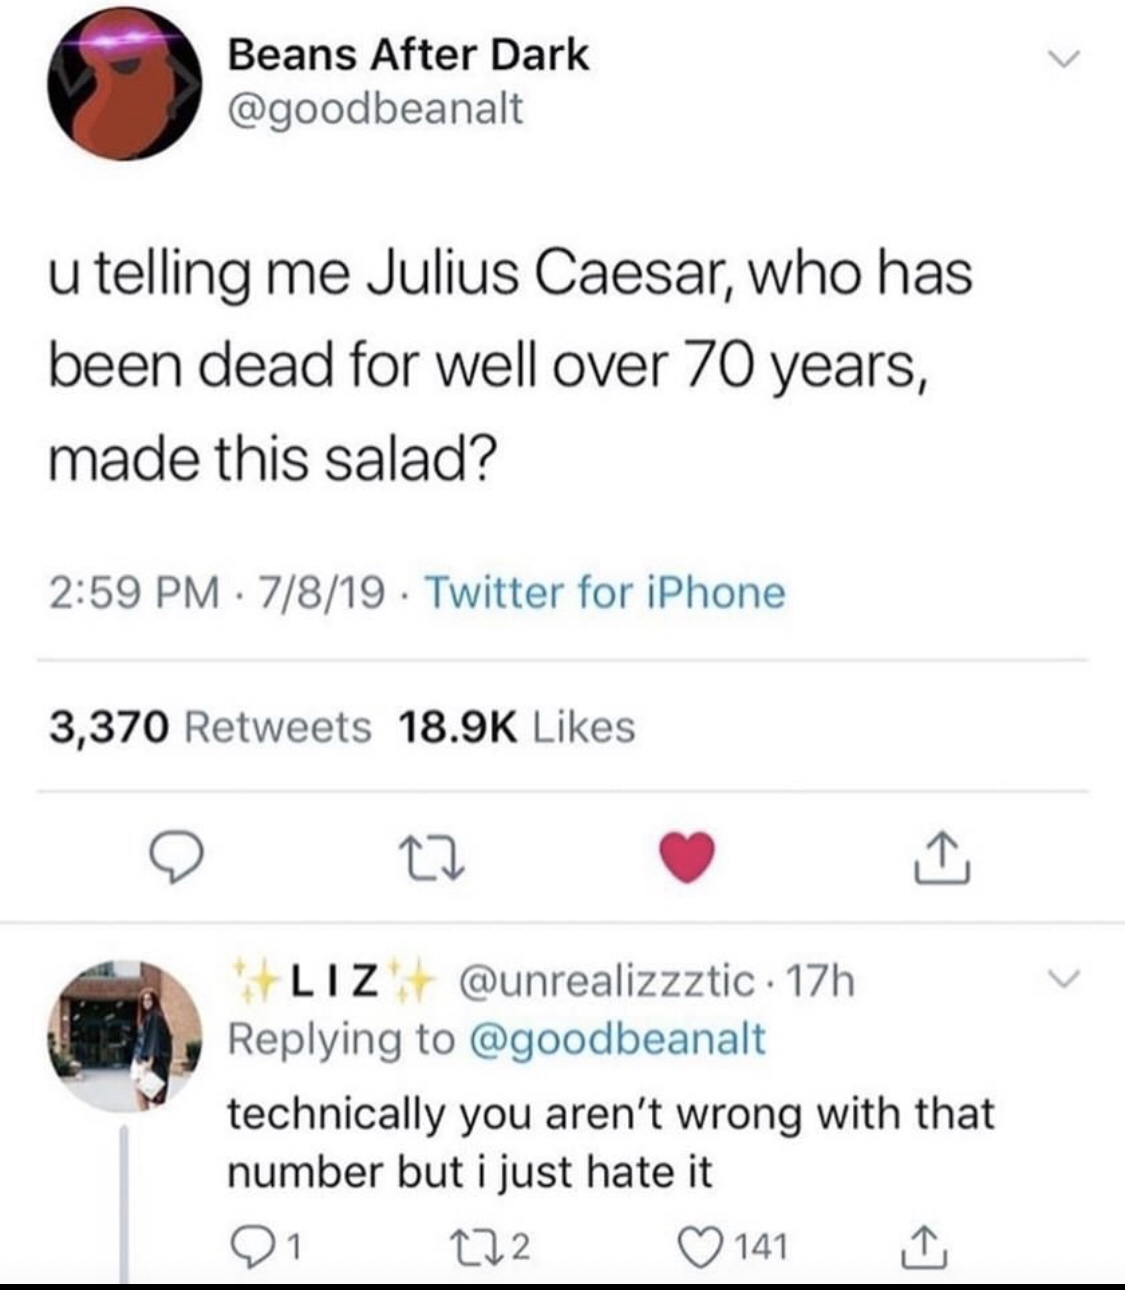 Beans After Dark u telling me Julius Caesar, who has been dead for well over 70 years, made this salad? 7819 . Twitter for iPhone 3,370 Liz . 17h technically you aren't wrong with that number but i just hate it 01 222 141